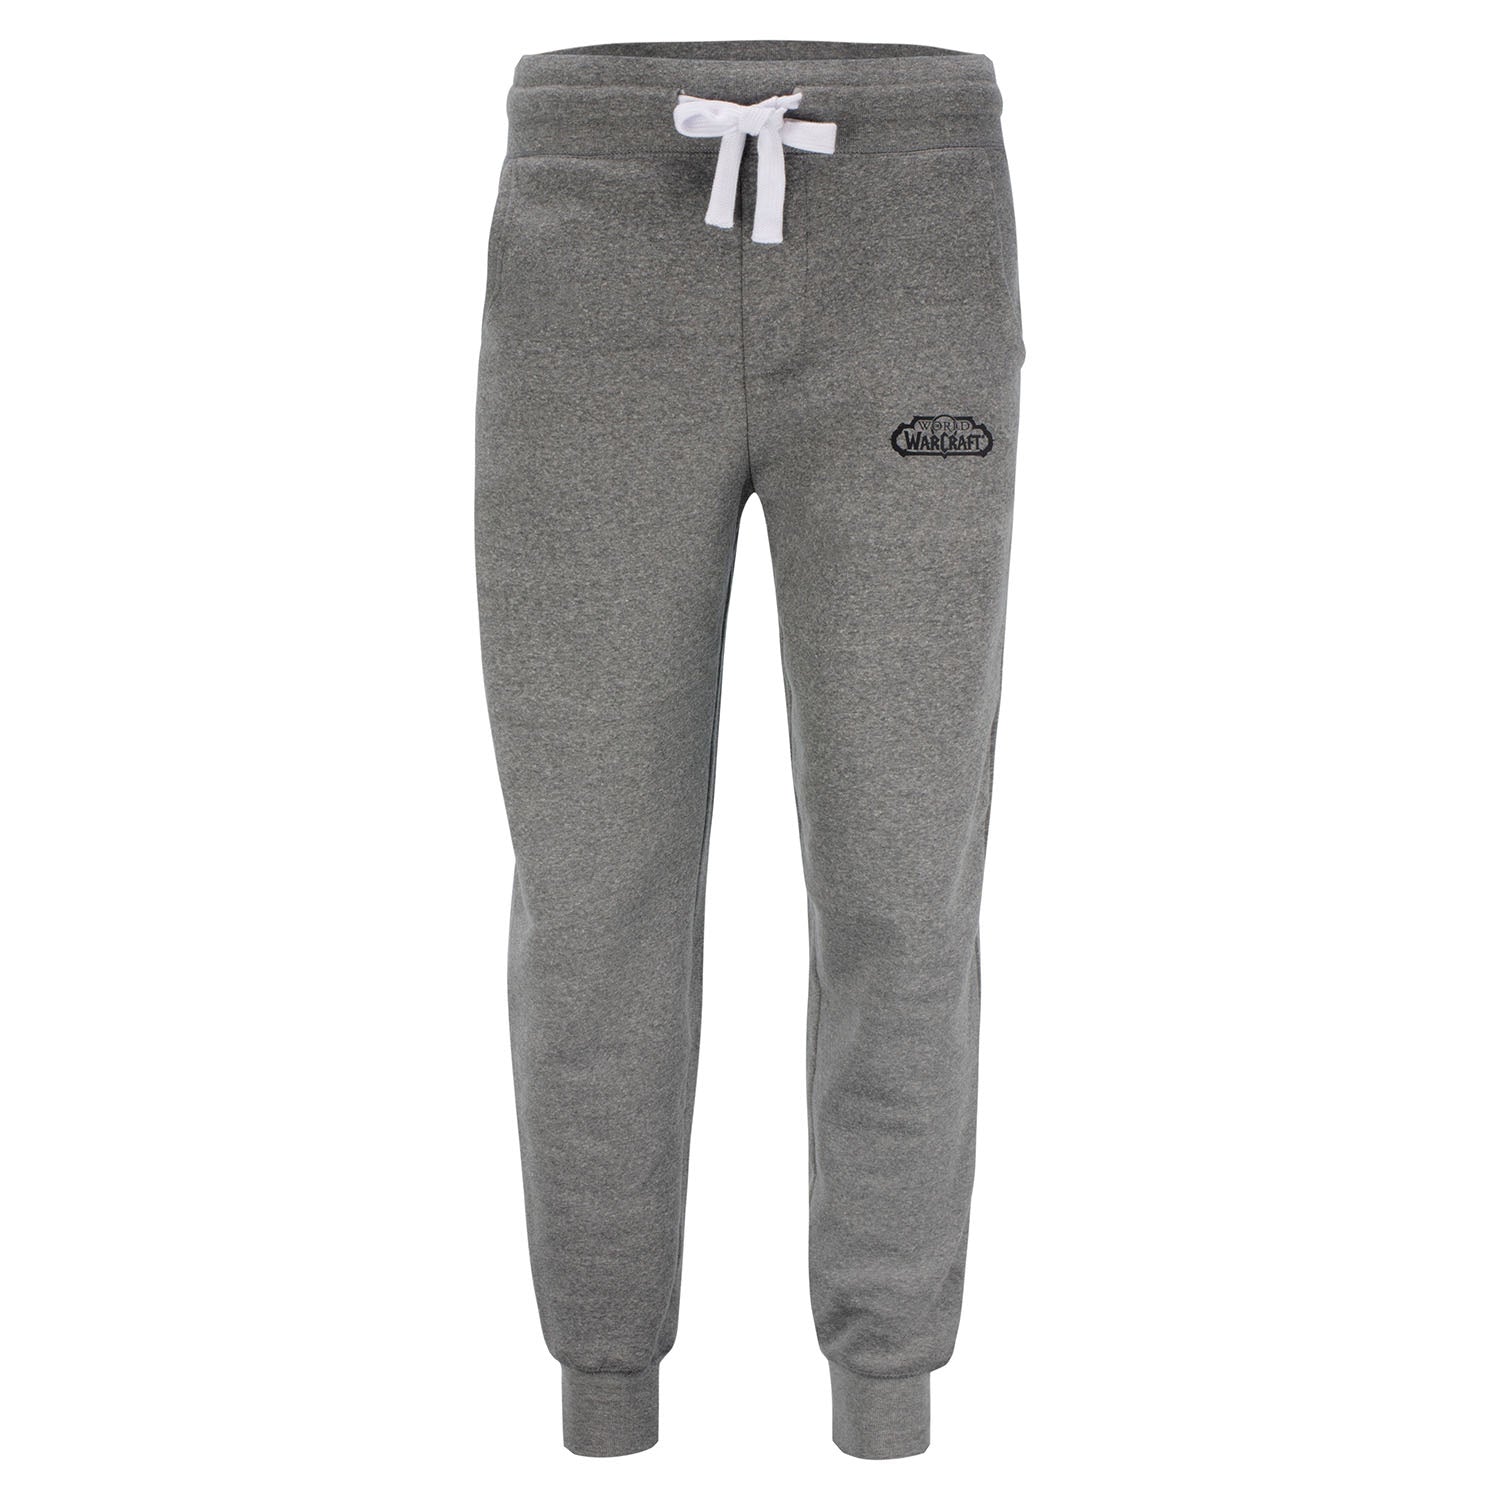 World of Warcraft Grey Joggers – Blizzard Gear Store